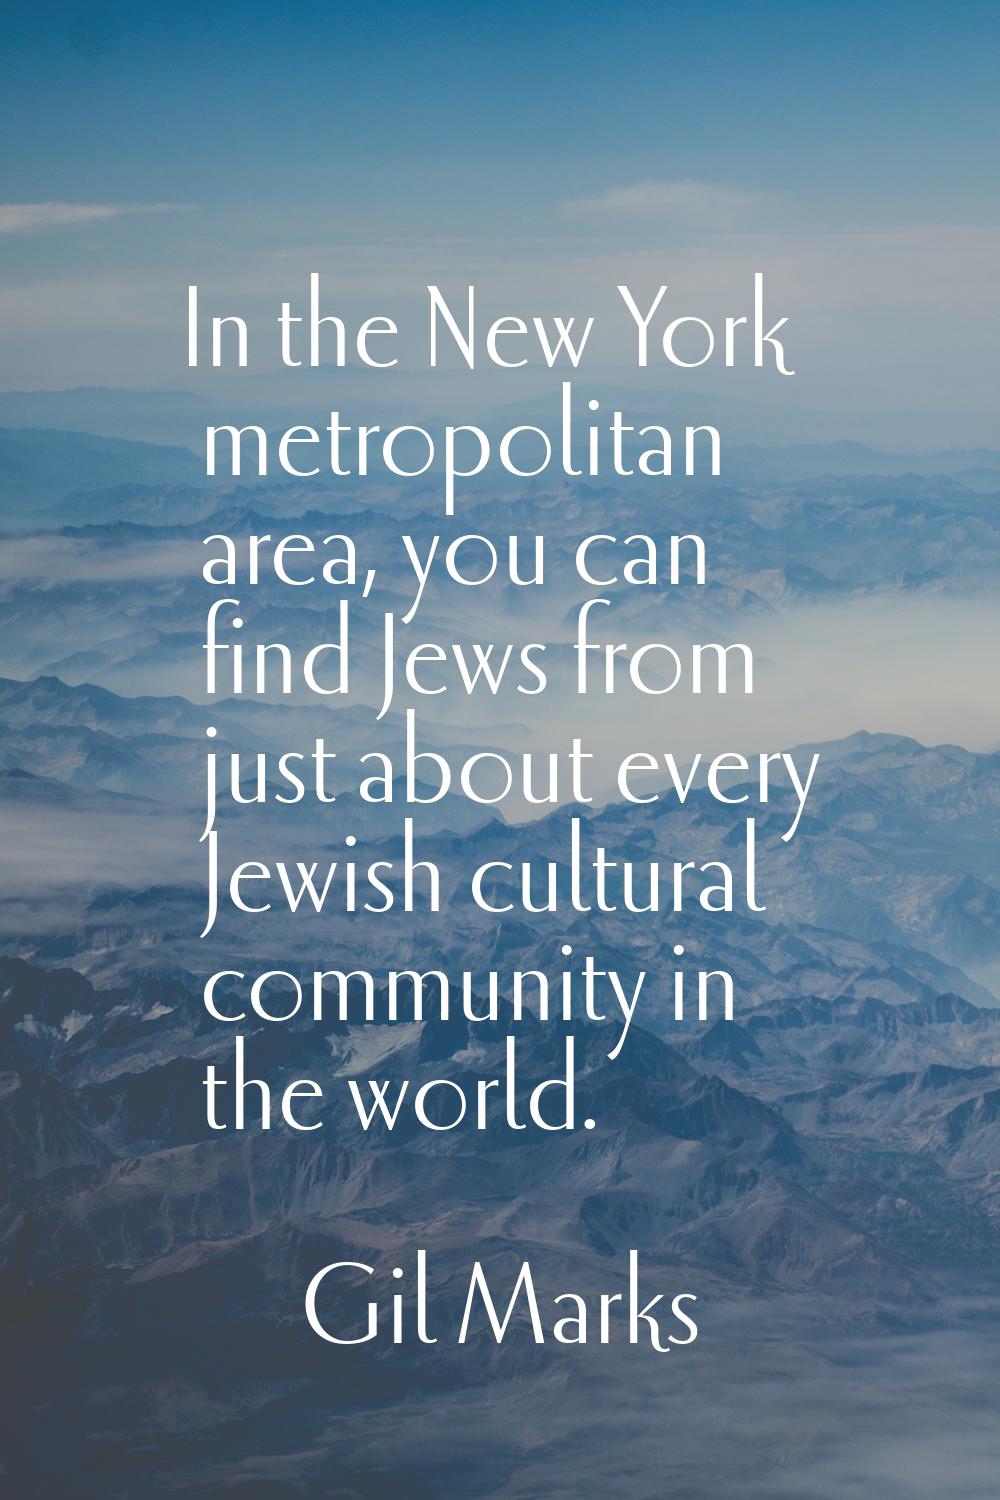 In the New York metropolitan area, you can find Jews from just about every Jewish cultural communit